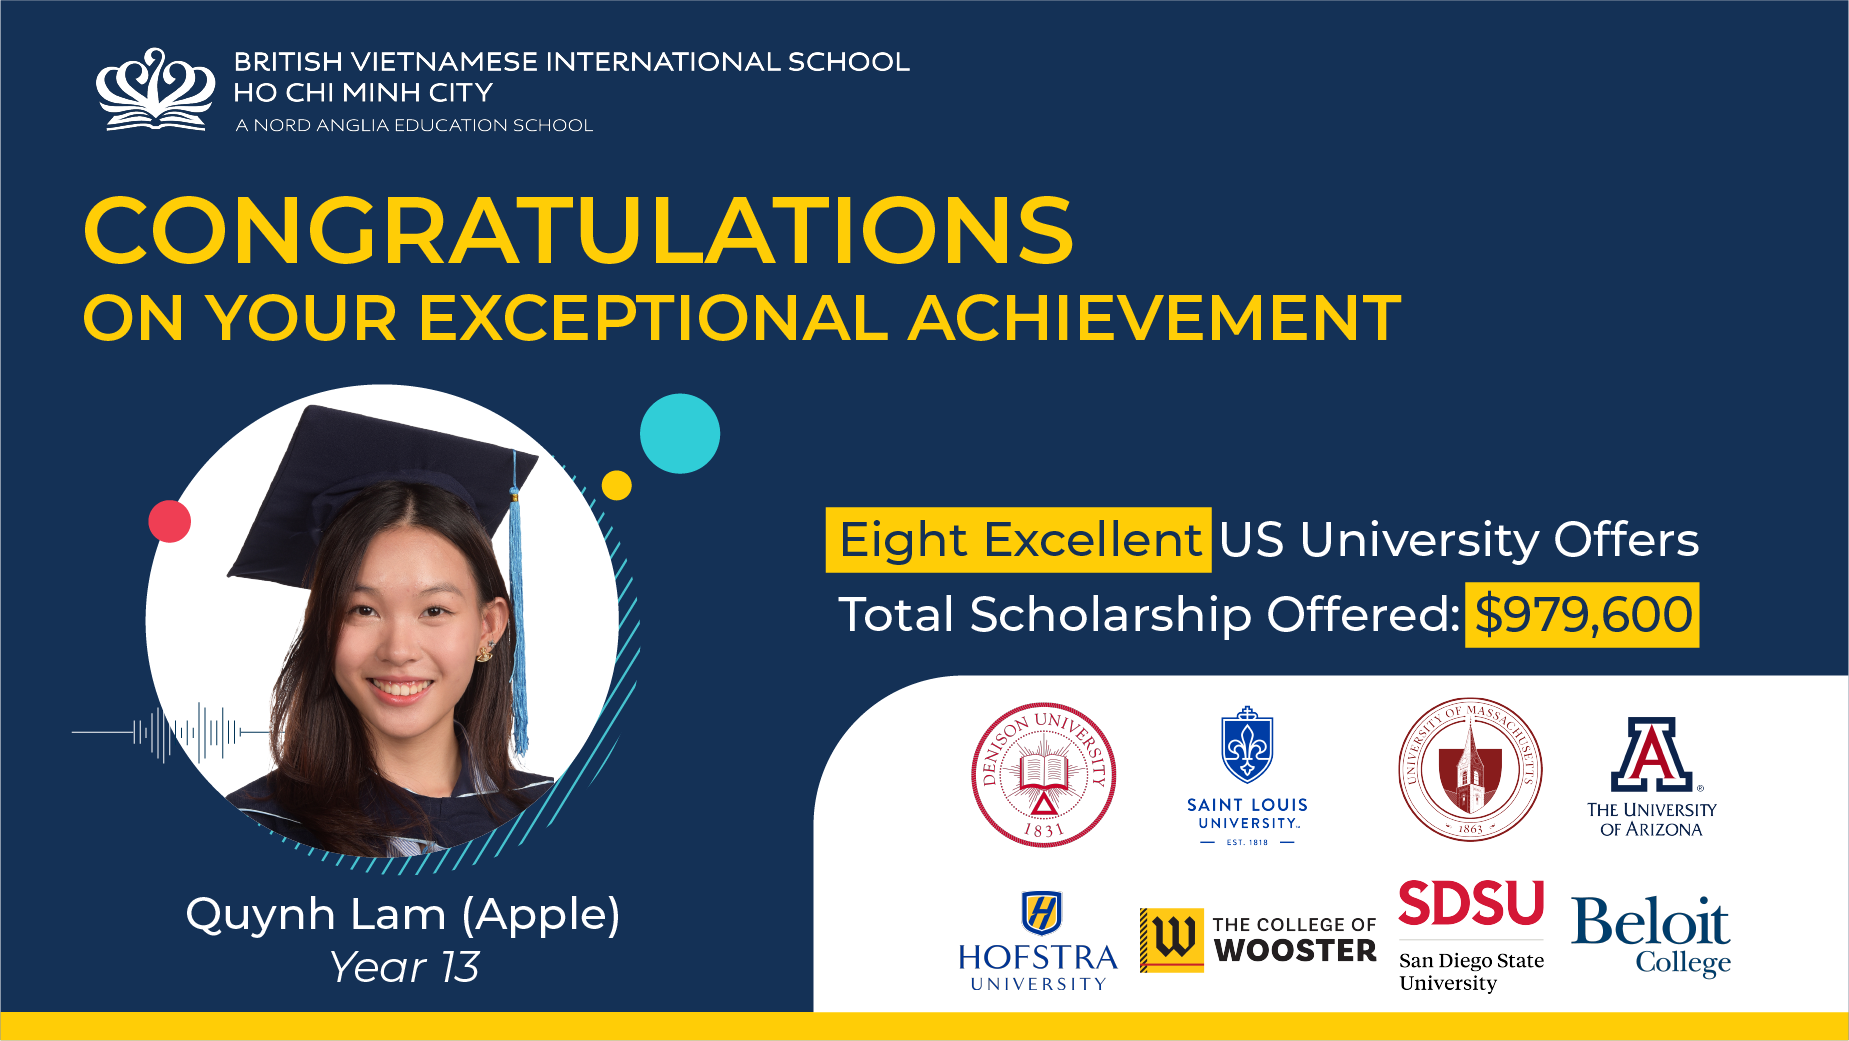 Quynh Lam (Apple), a Year 13 student, has been admitted to 8 US universities with a total scholarship value of 23,5 billion Vietnamese Dong-Quynh Lam Apple Year 13 has been admitted to 8 US universities total scholarship 23 5 billion Dong-Apple - Uni Offer (5)